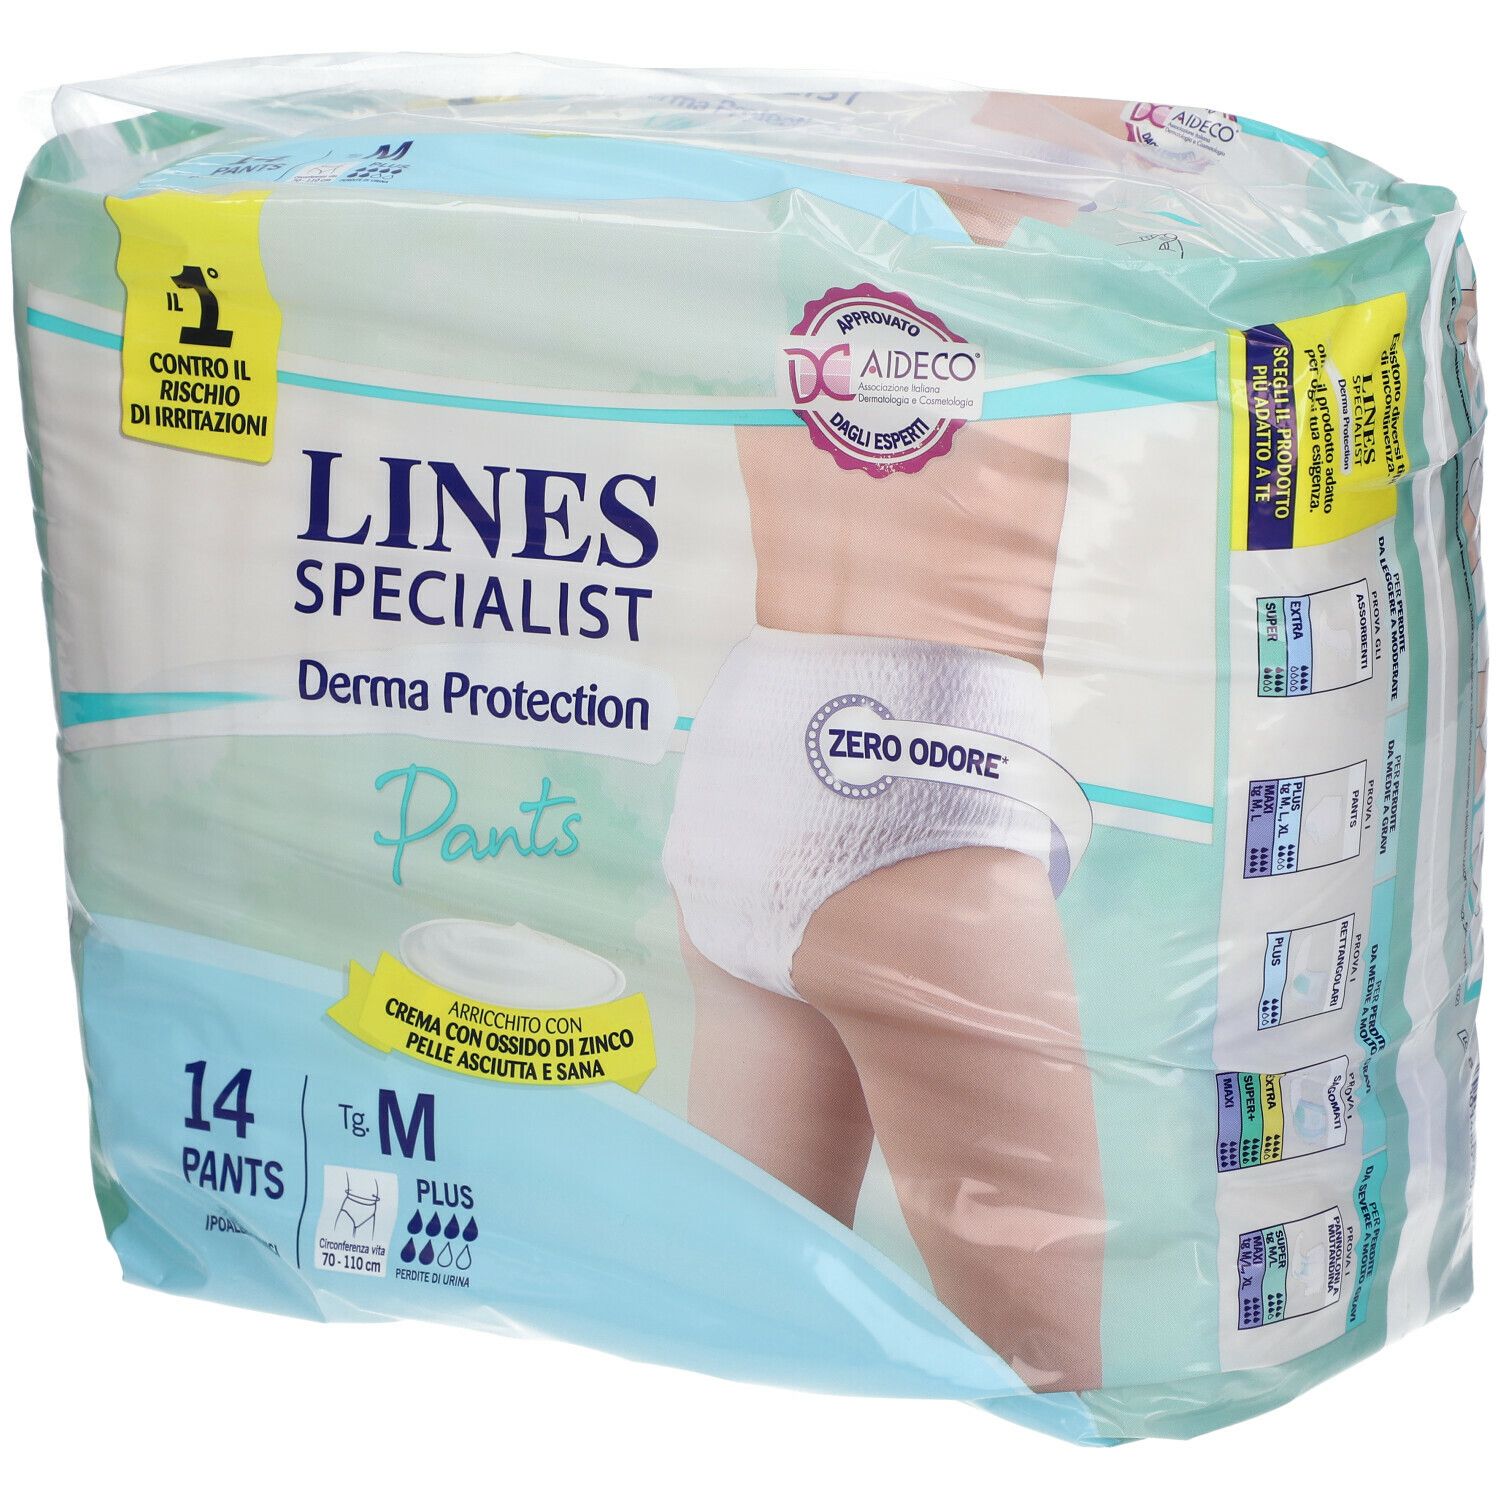 LINES Specialist Derma Protection Pants